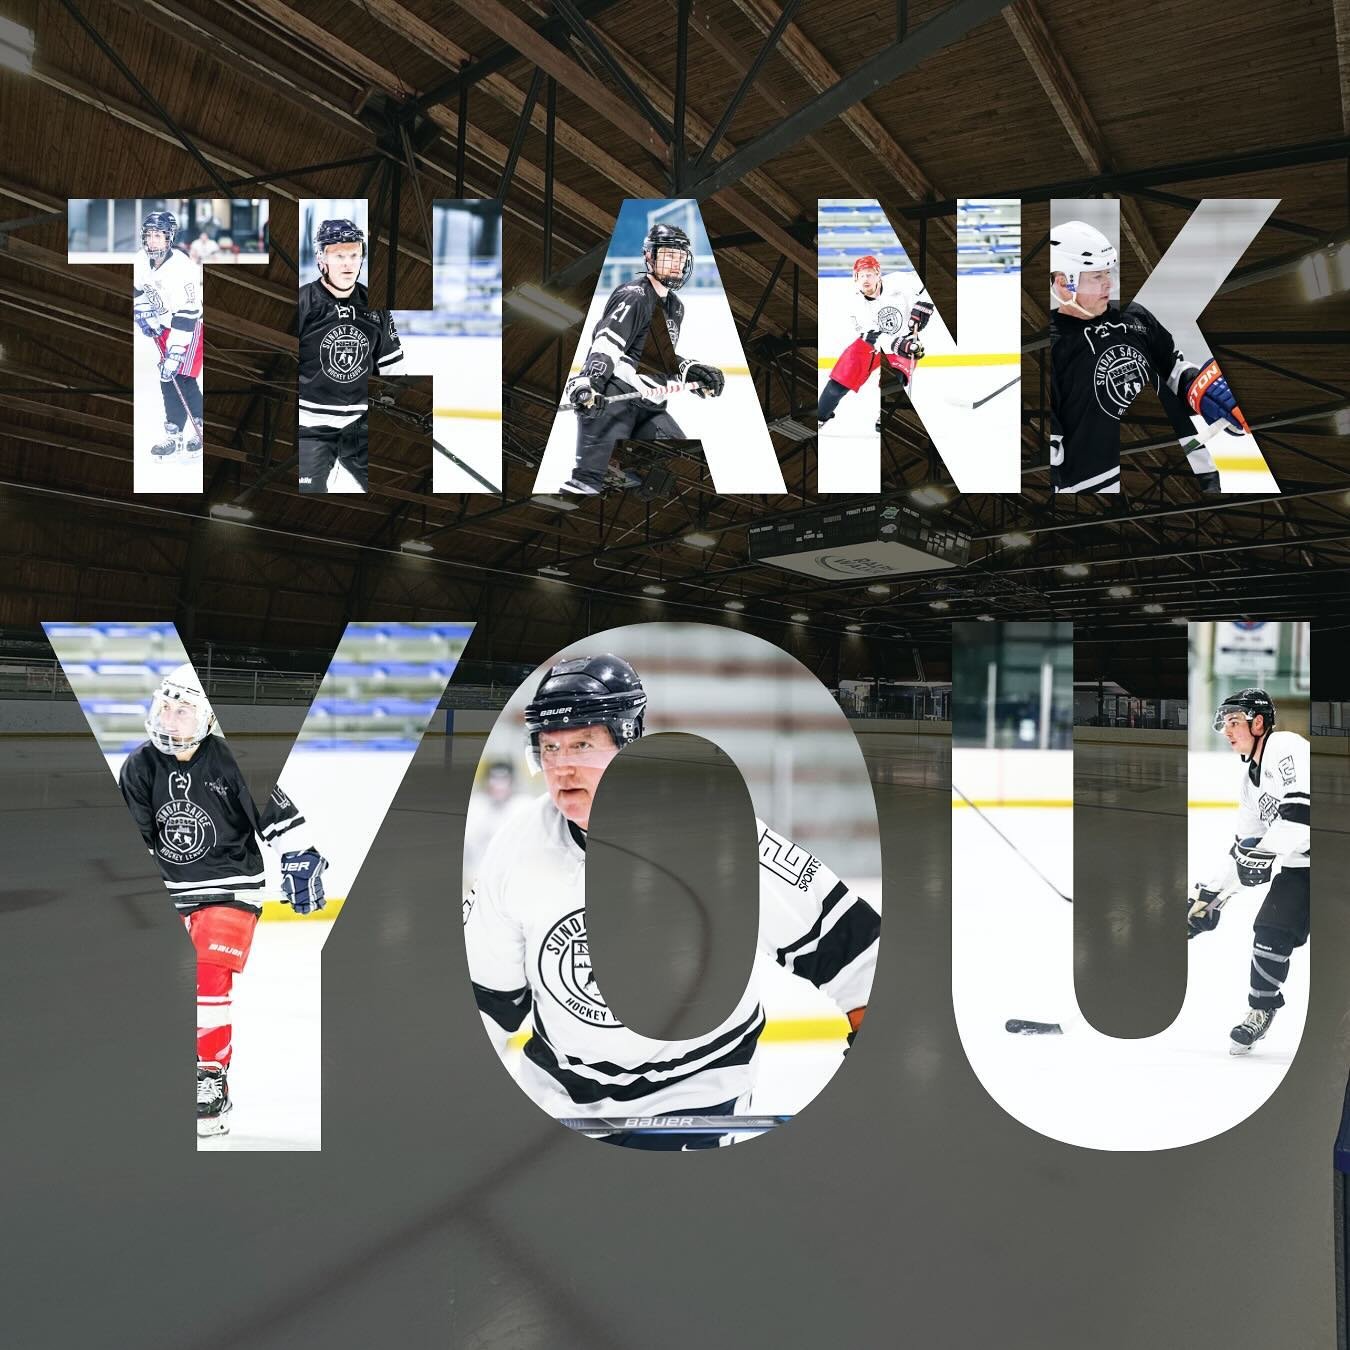 THANK YOU to everyone who came out and skated with us this winter! We had a blast sharing the ice with you!

📸: @fille.du.chalifoux 
📸: @alyciasandella